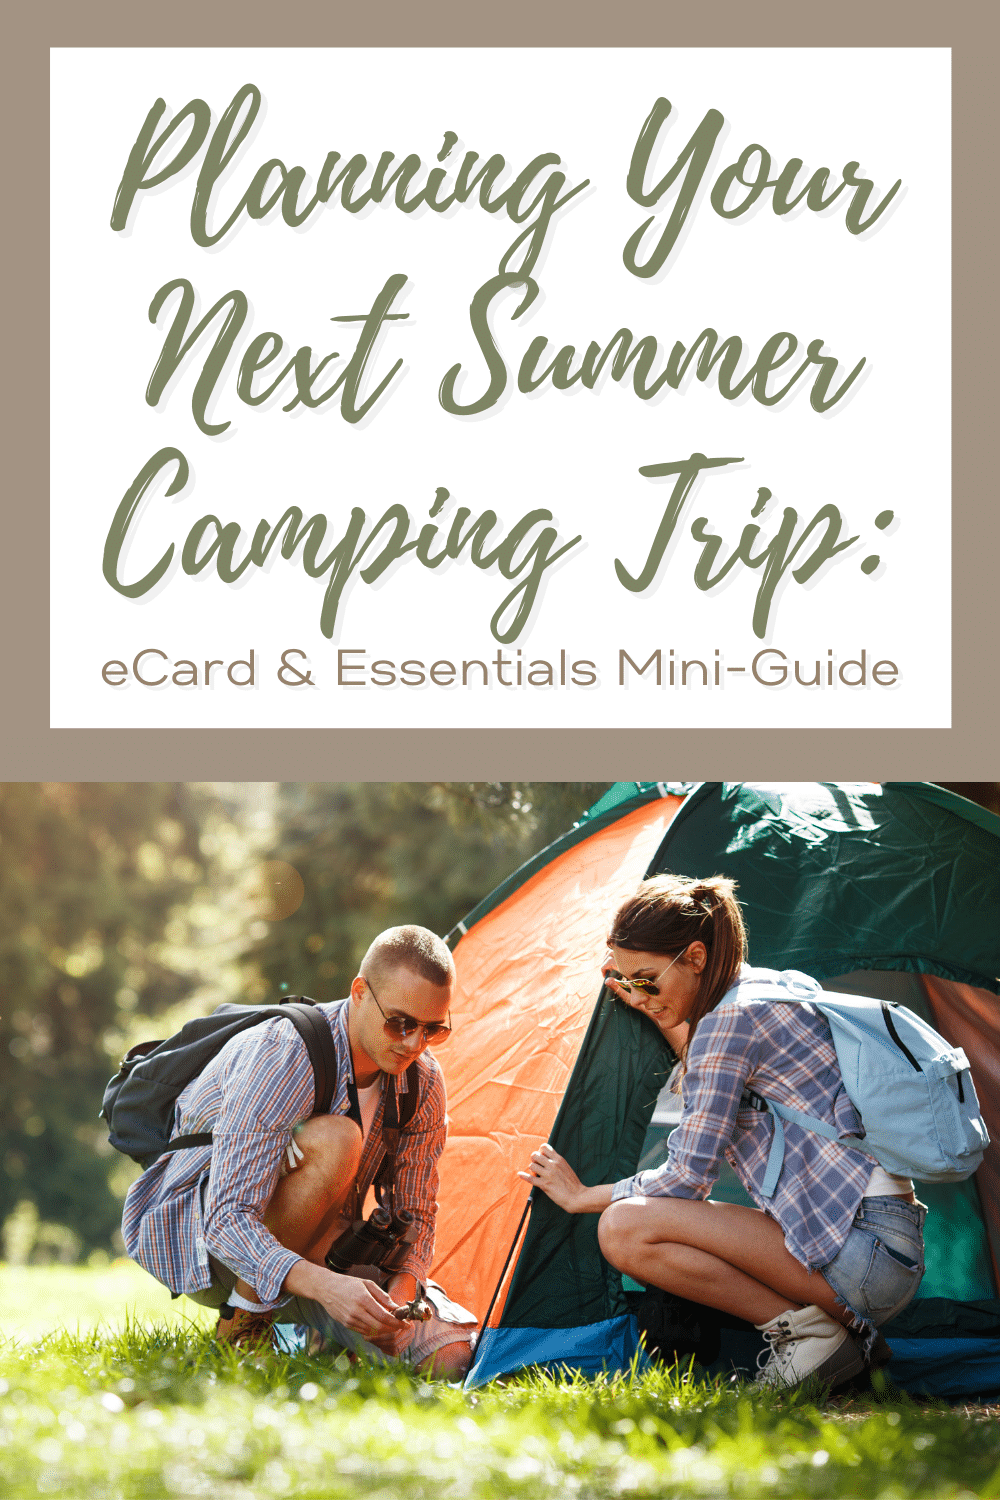 Planning Your Next Summer Camping Trip: eCard & Essentials Mini-Guide